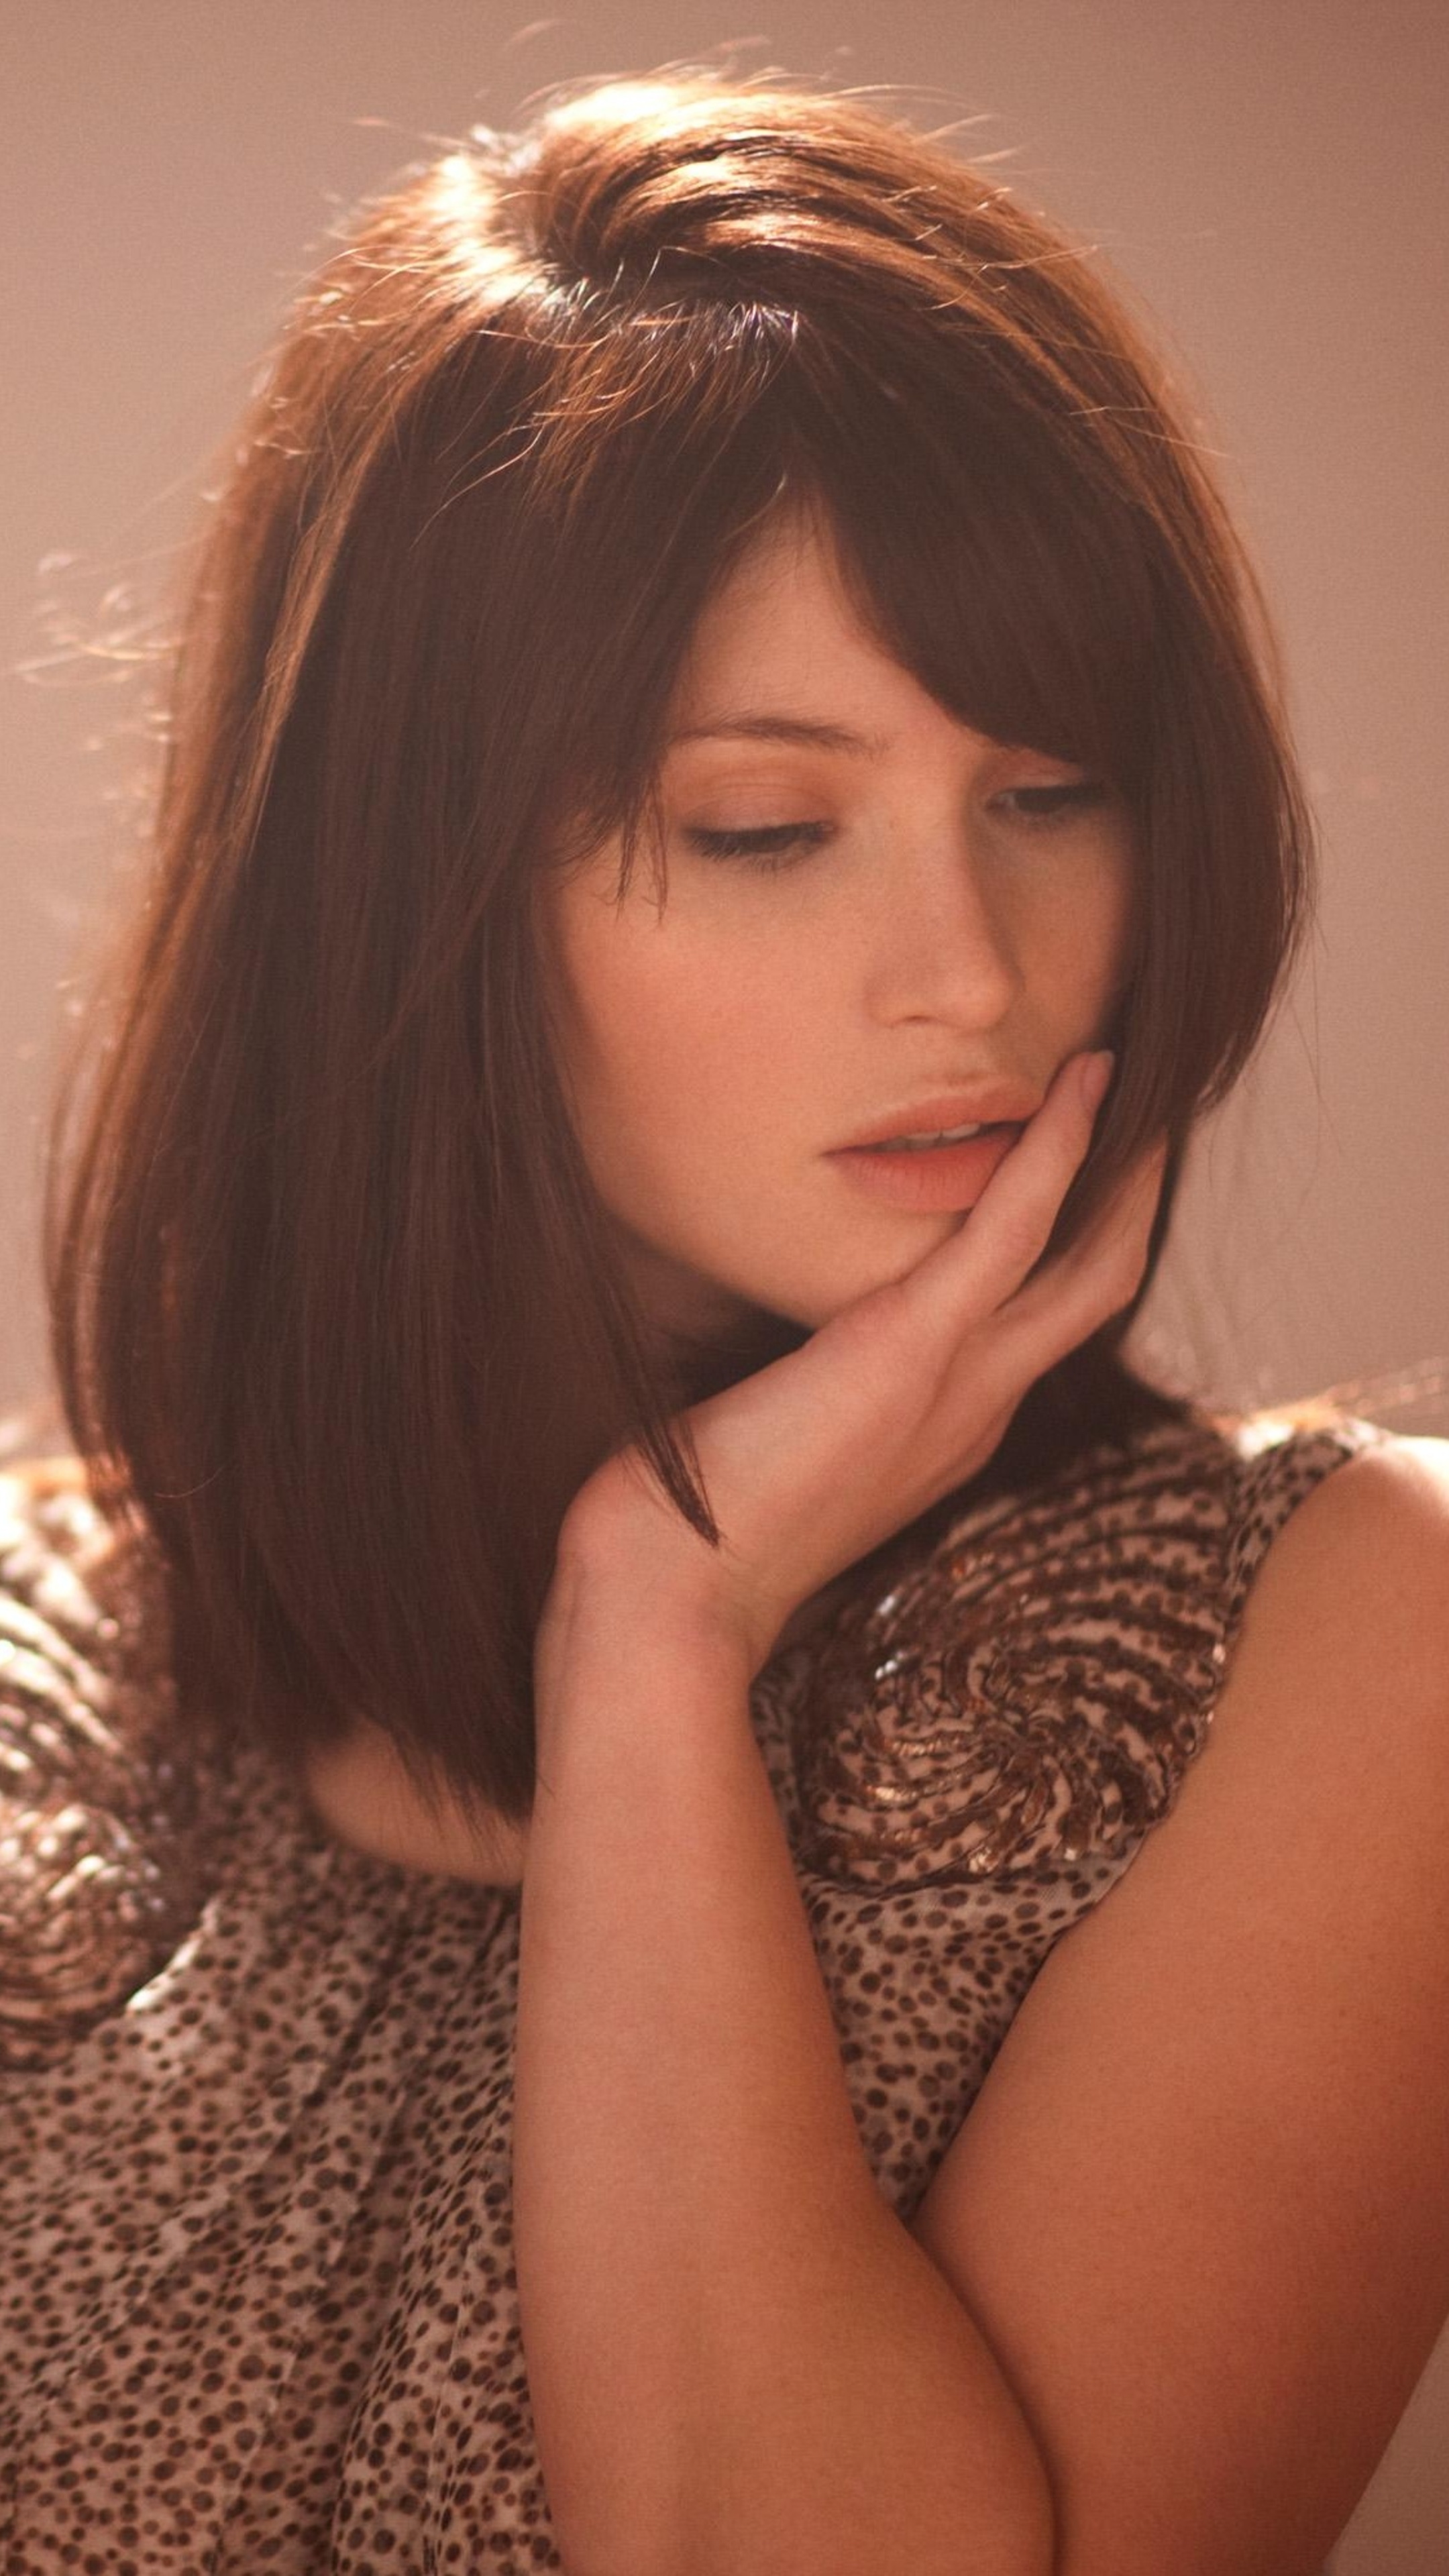 Gemma Arterton: Her first professional role, Stephen Poliakoff's Capturing Mary. 2160x3840 4K Wallpaper.